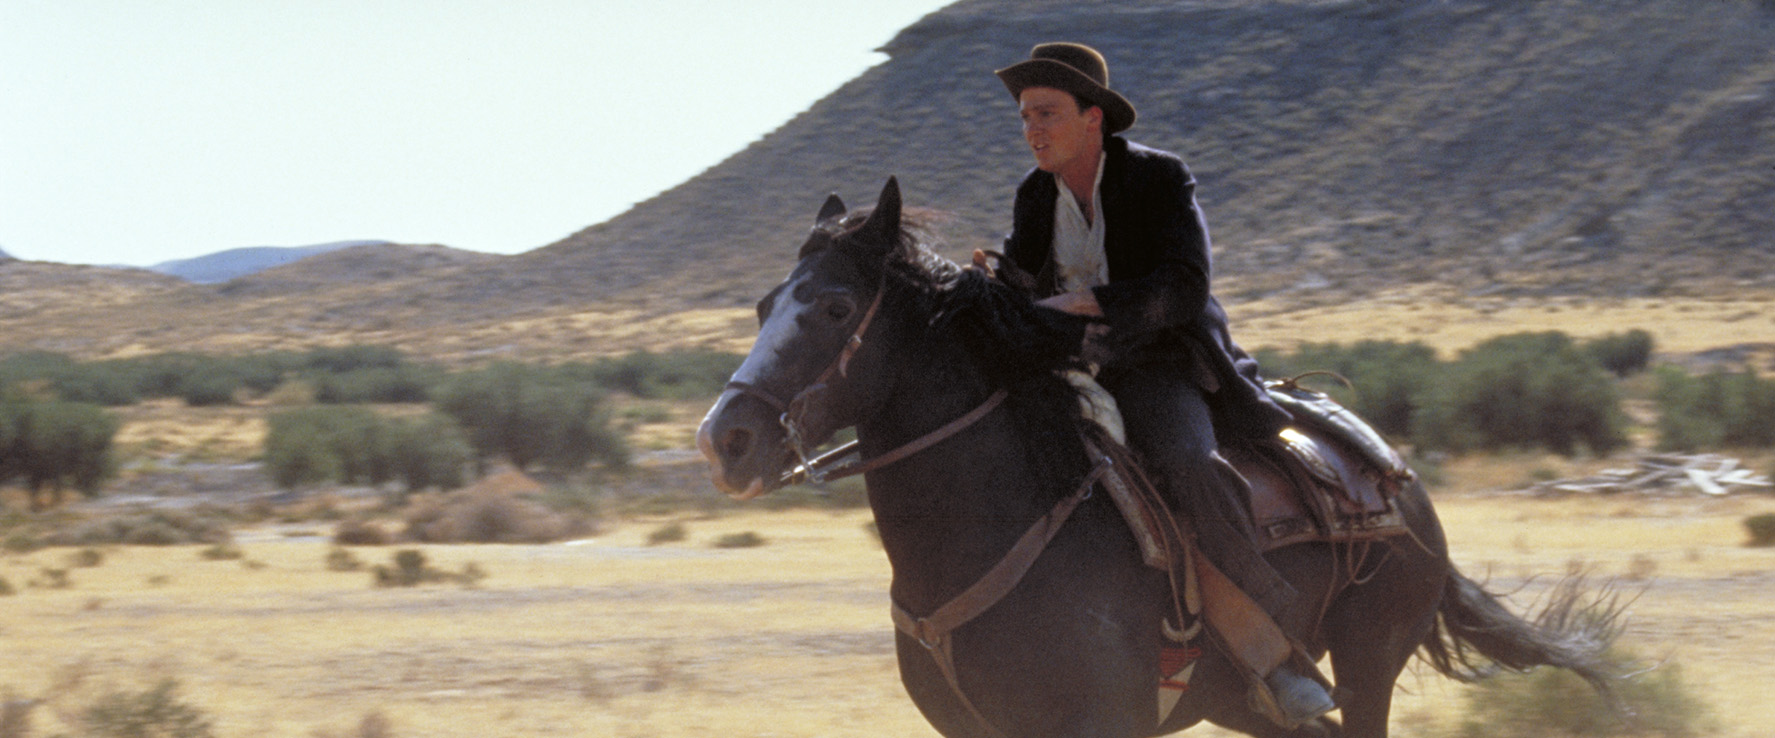 Young Indy on horseback